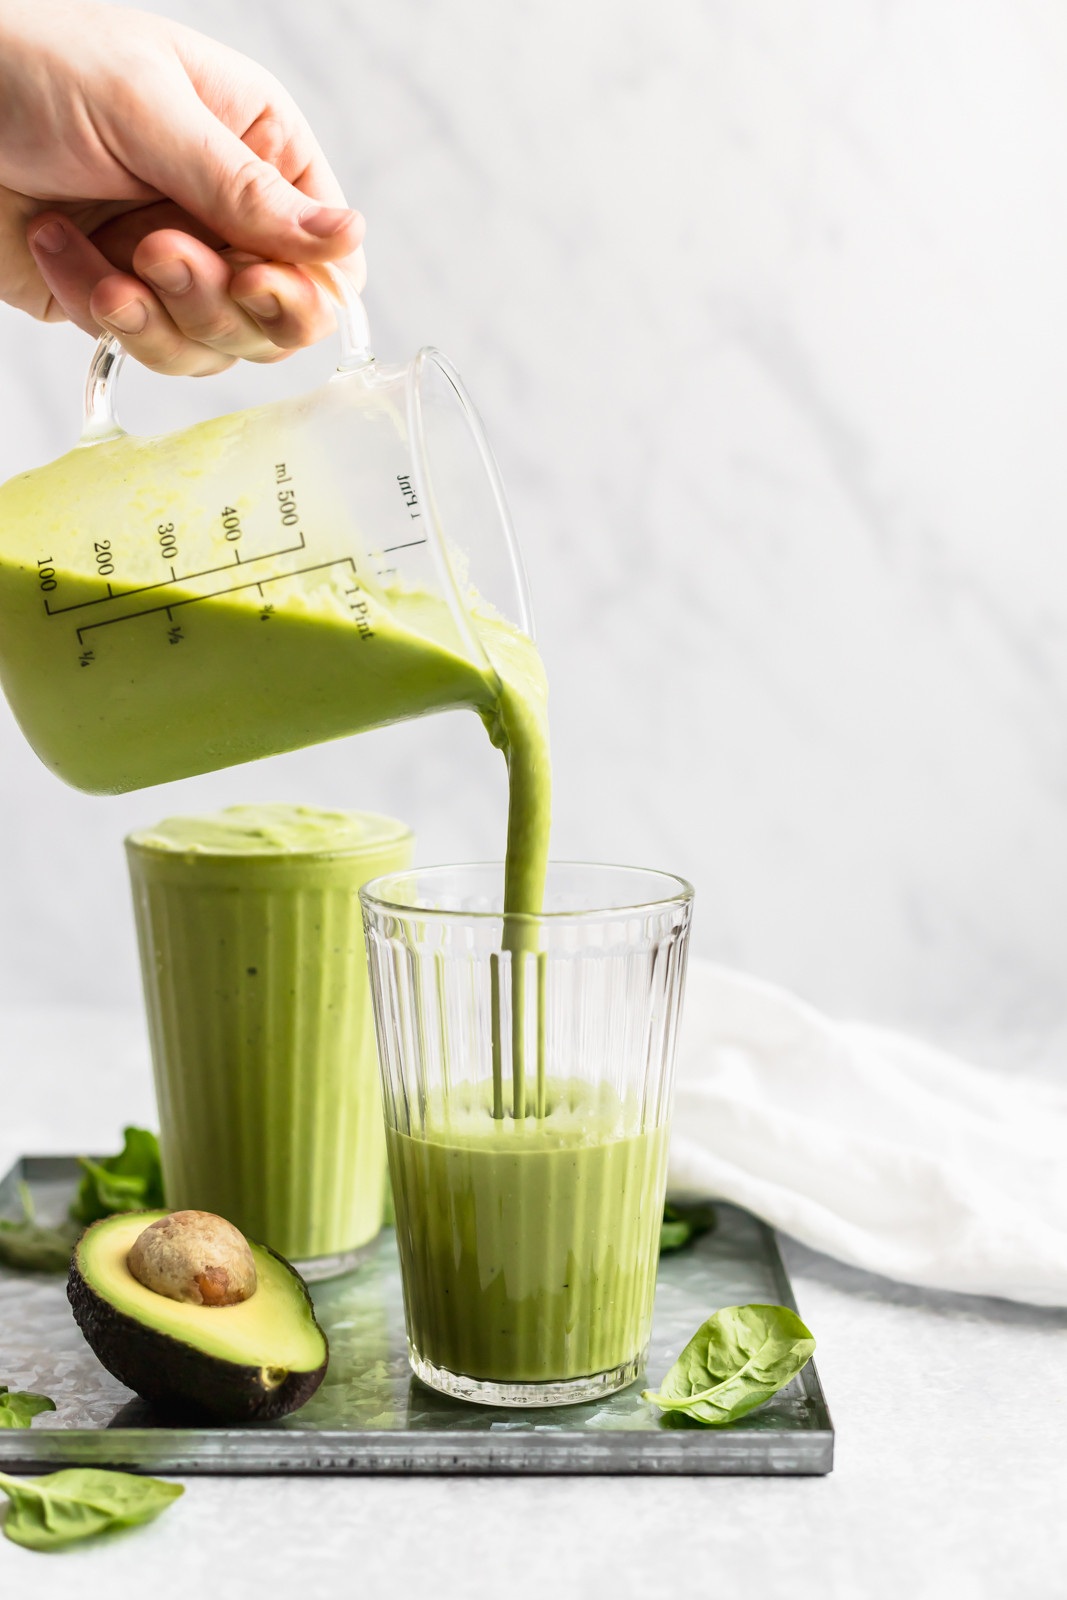 Green Breakfast Smoothie Recipes
 The Best Green Smoothie Recipe with avocado